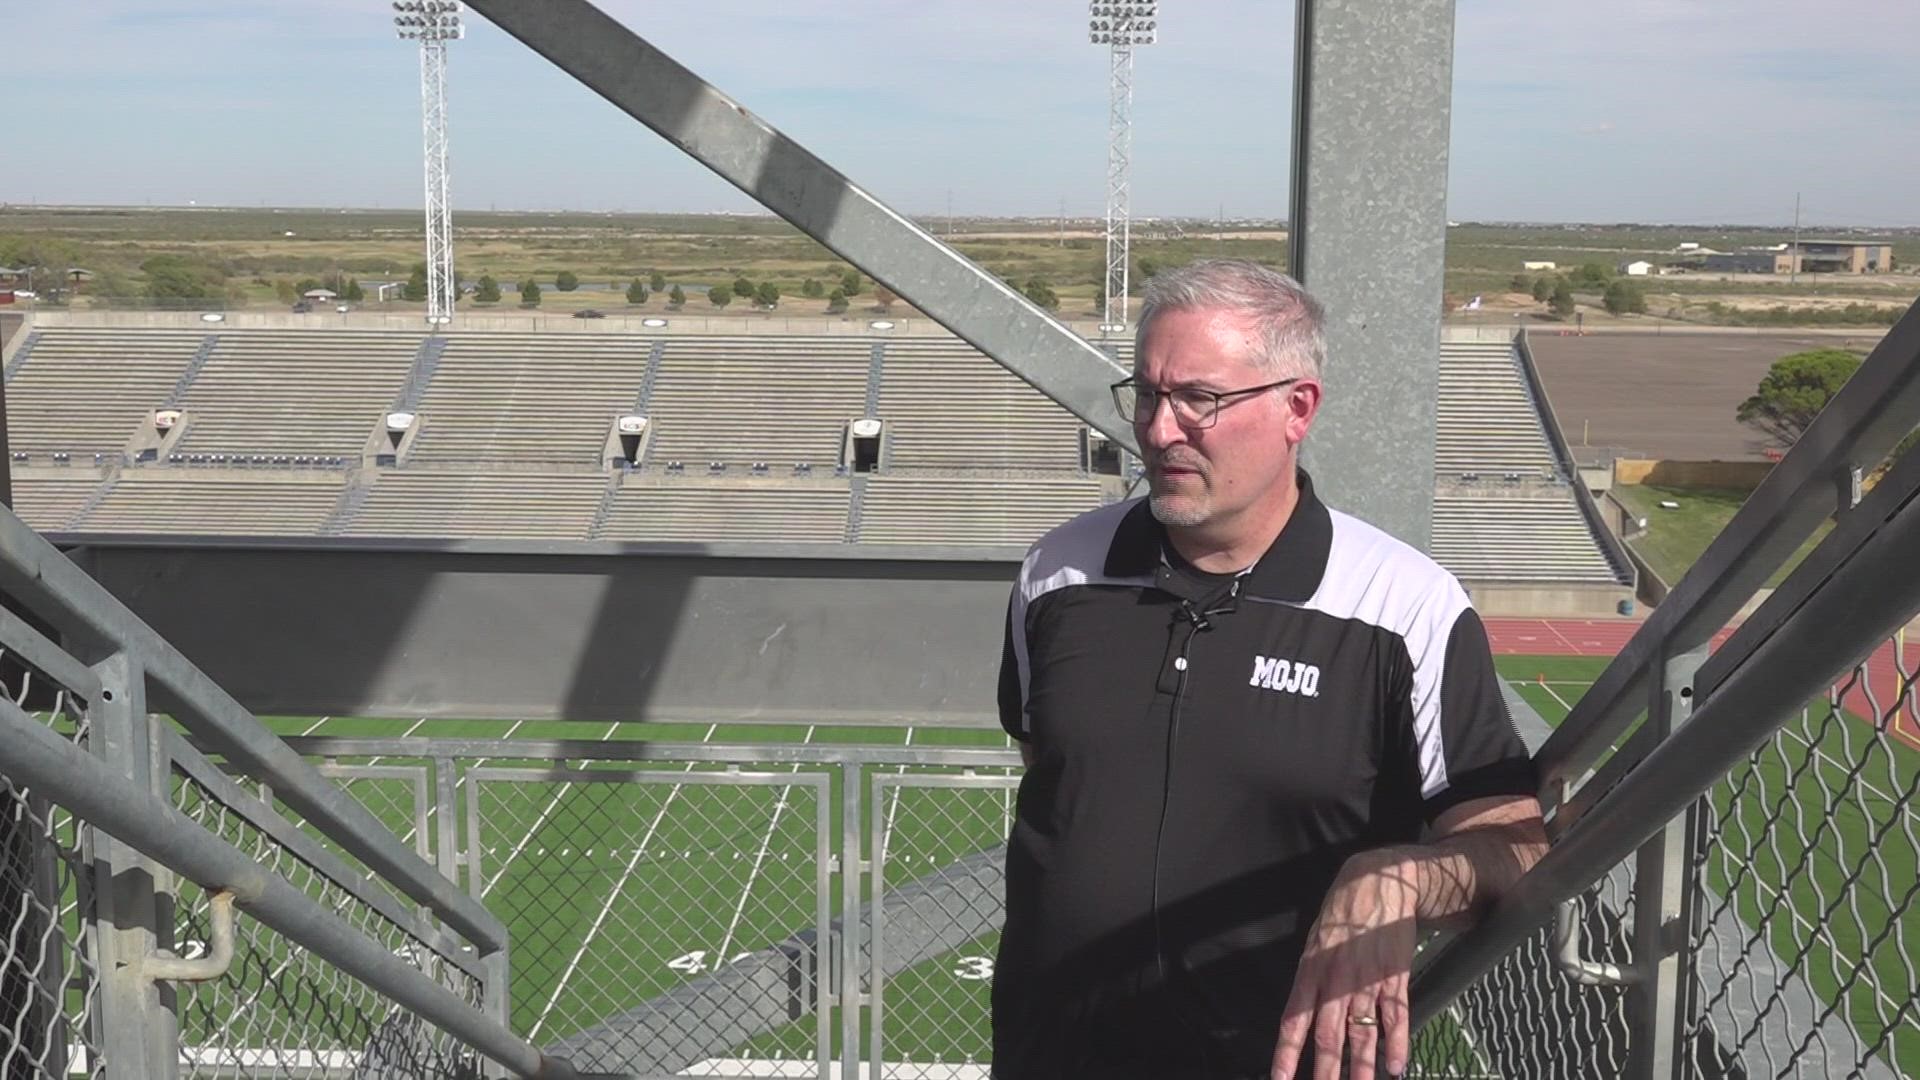 The Permian Panther football program have an elusive history that far exceeds their "Friday Night Lights" fame.